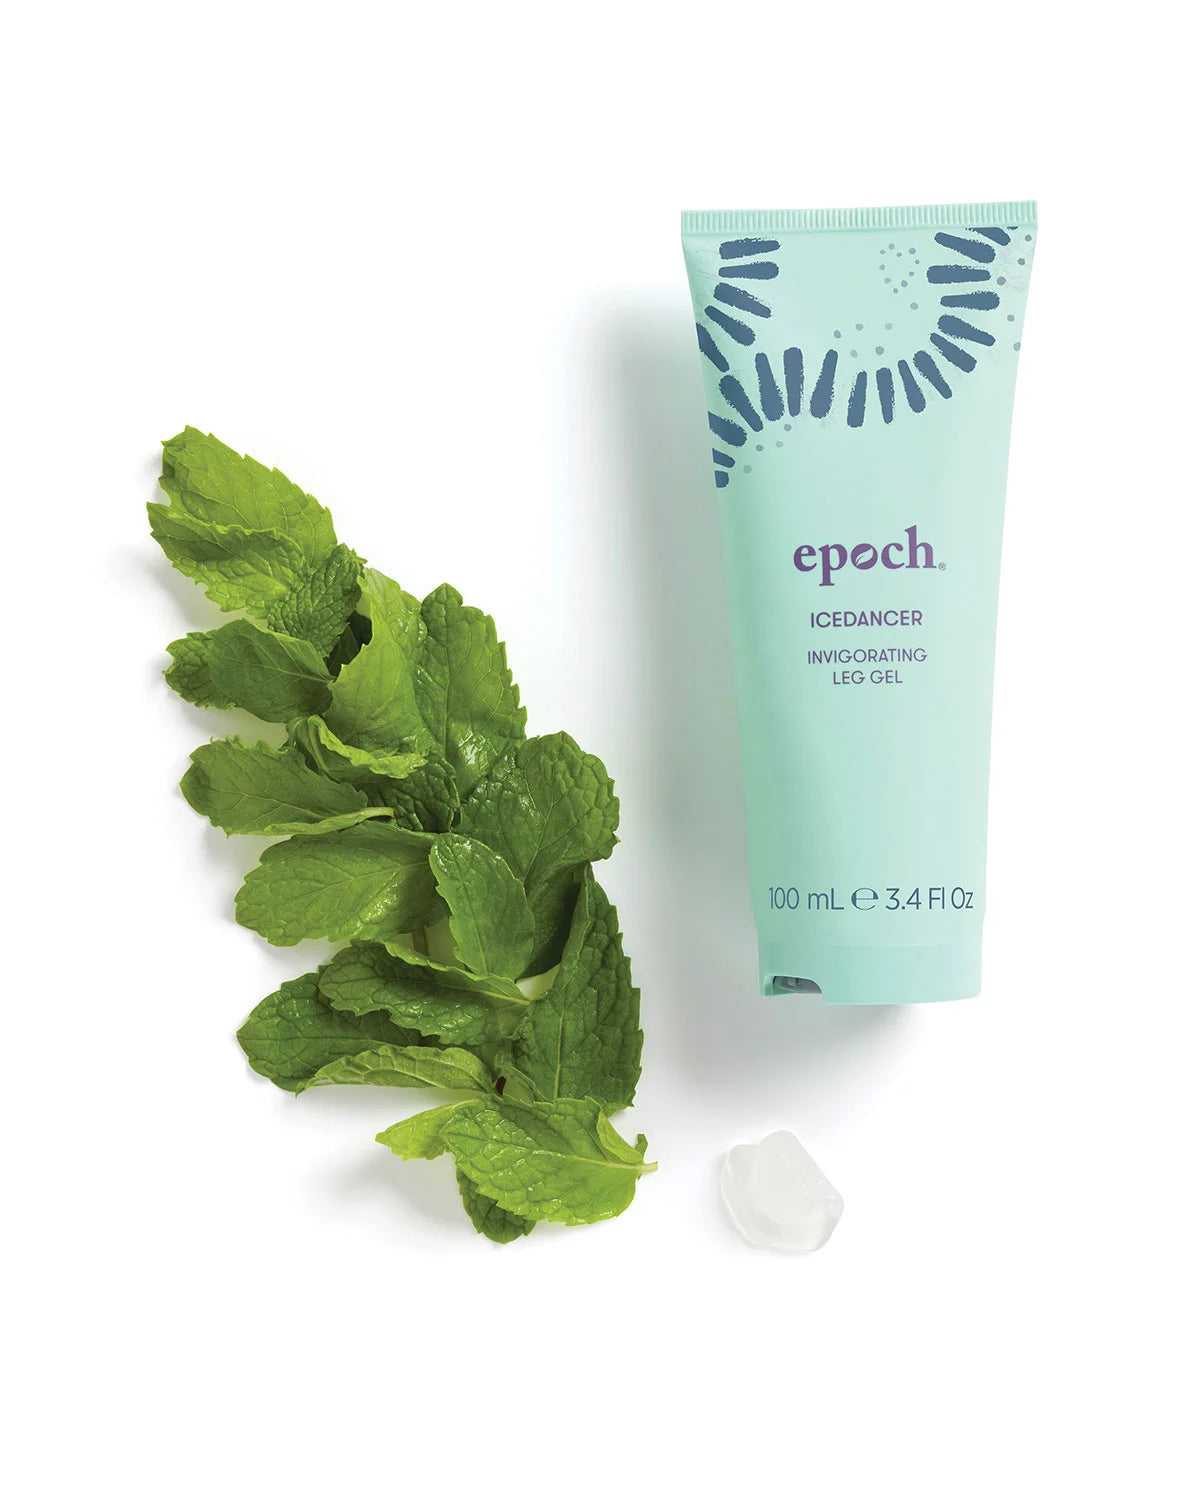 Epoch® IceDancer® Invigorating Leg GelBuy Epoch® IceDancer® Invigorating Leg Gel
* Discount will apply at checkout. 
This clear, lightweight formula features Natural Wild Mint, traditionally used in the Epoch® IceDancer® Invigorating Leg Gel